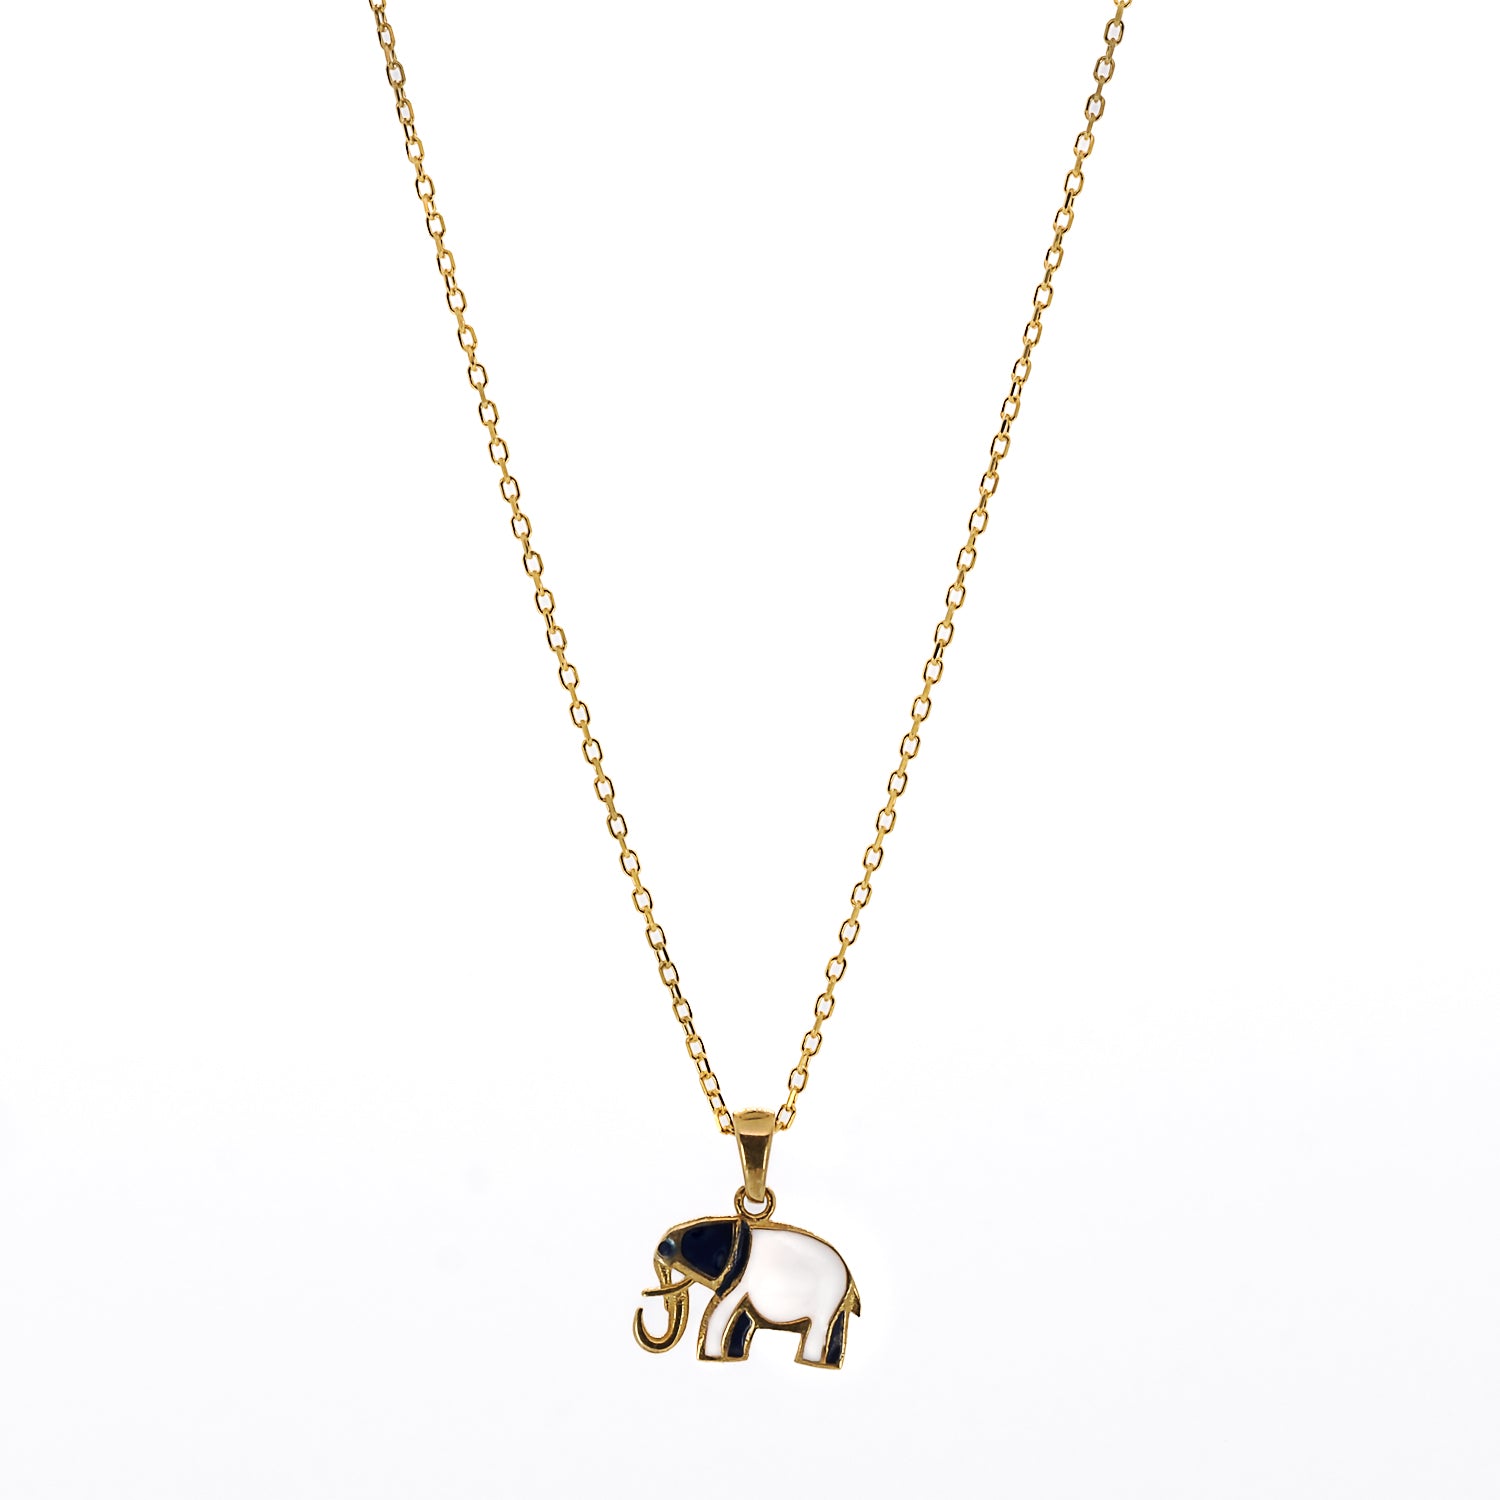 Gold Blue And White Elephant Necklace, a versatile and stylish accessory that can be worn for any occasion.